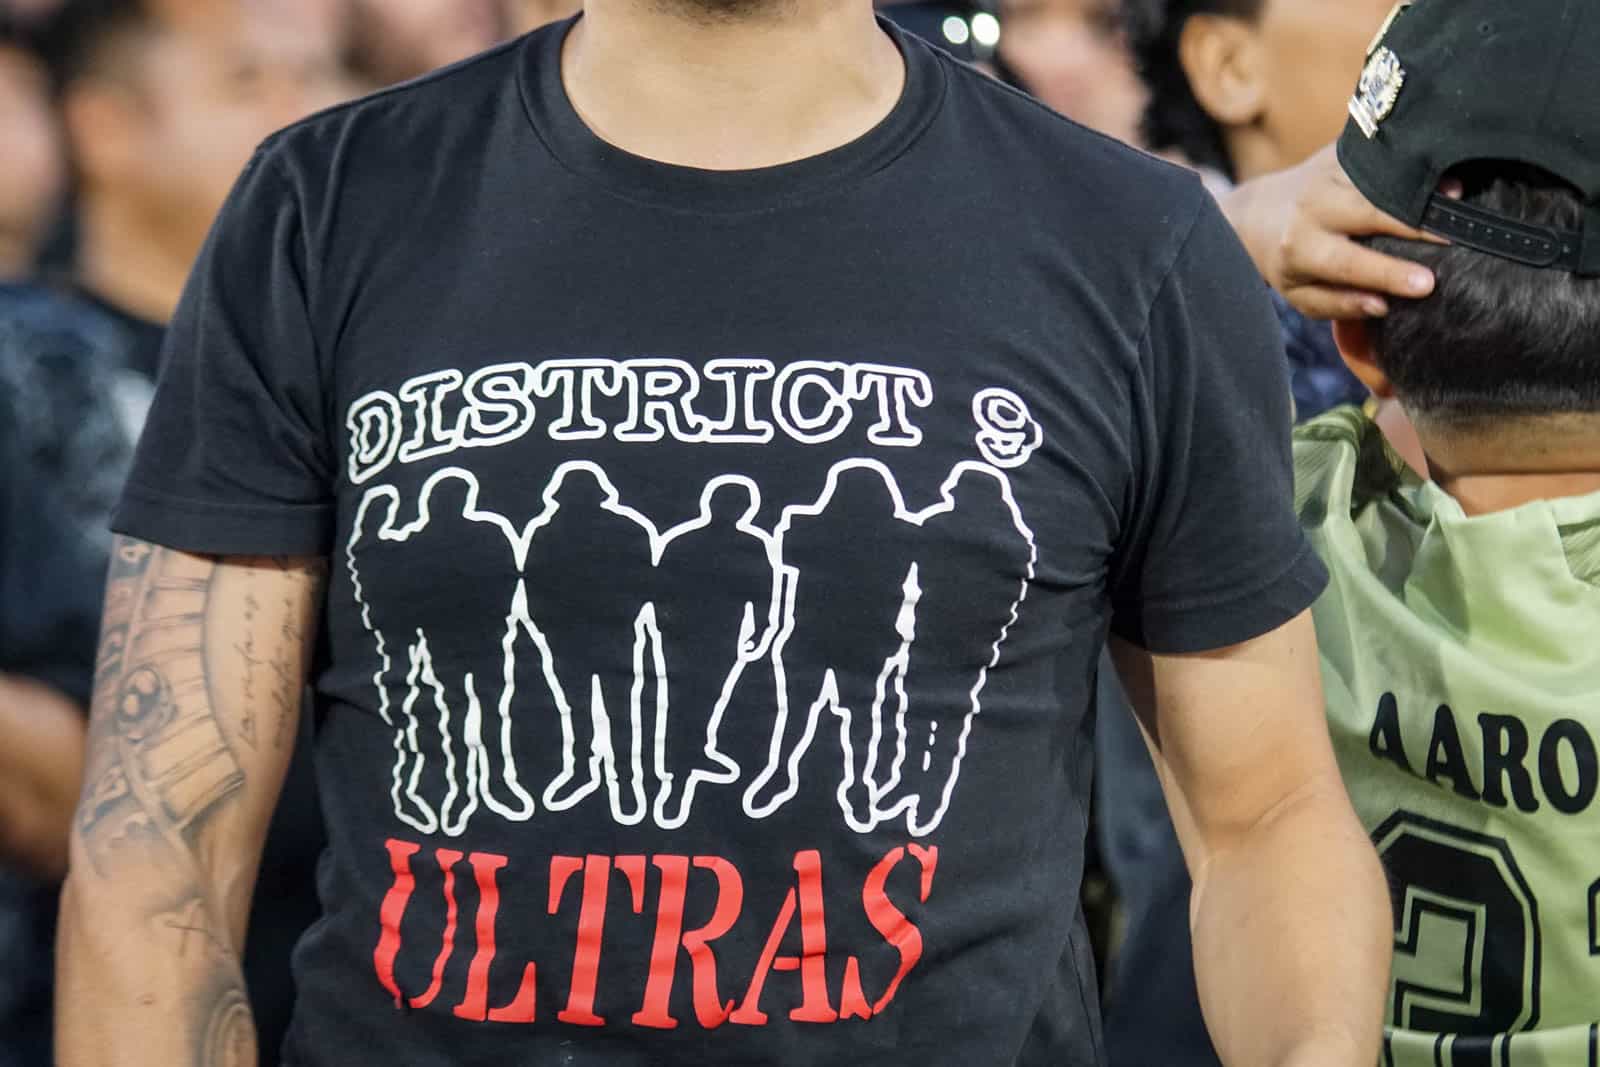 How LAFC’s District 9 Ultras are swinging the American fandom for fences